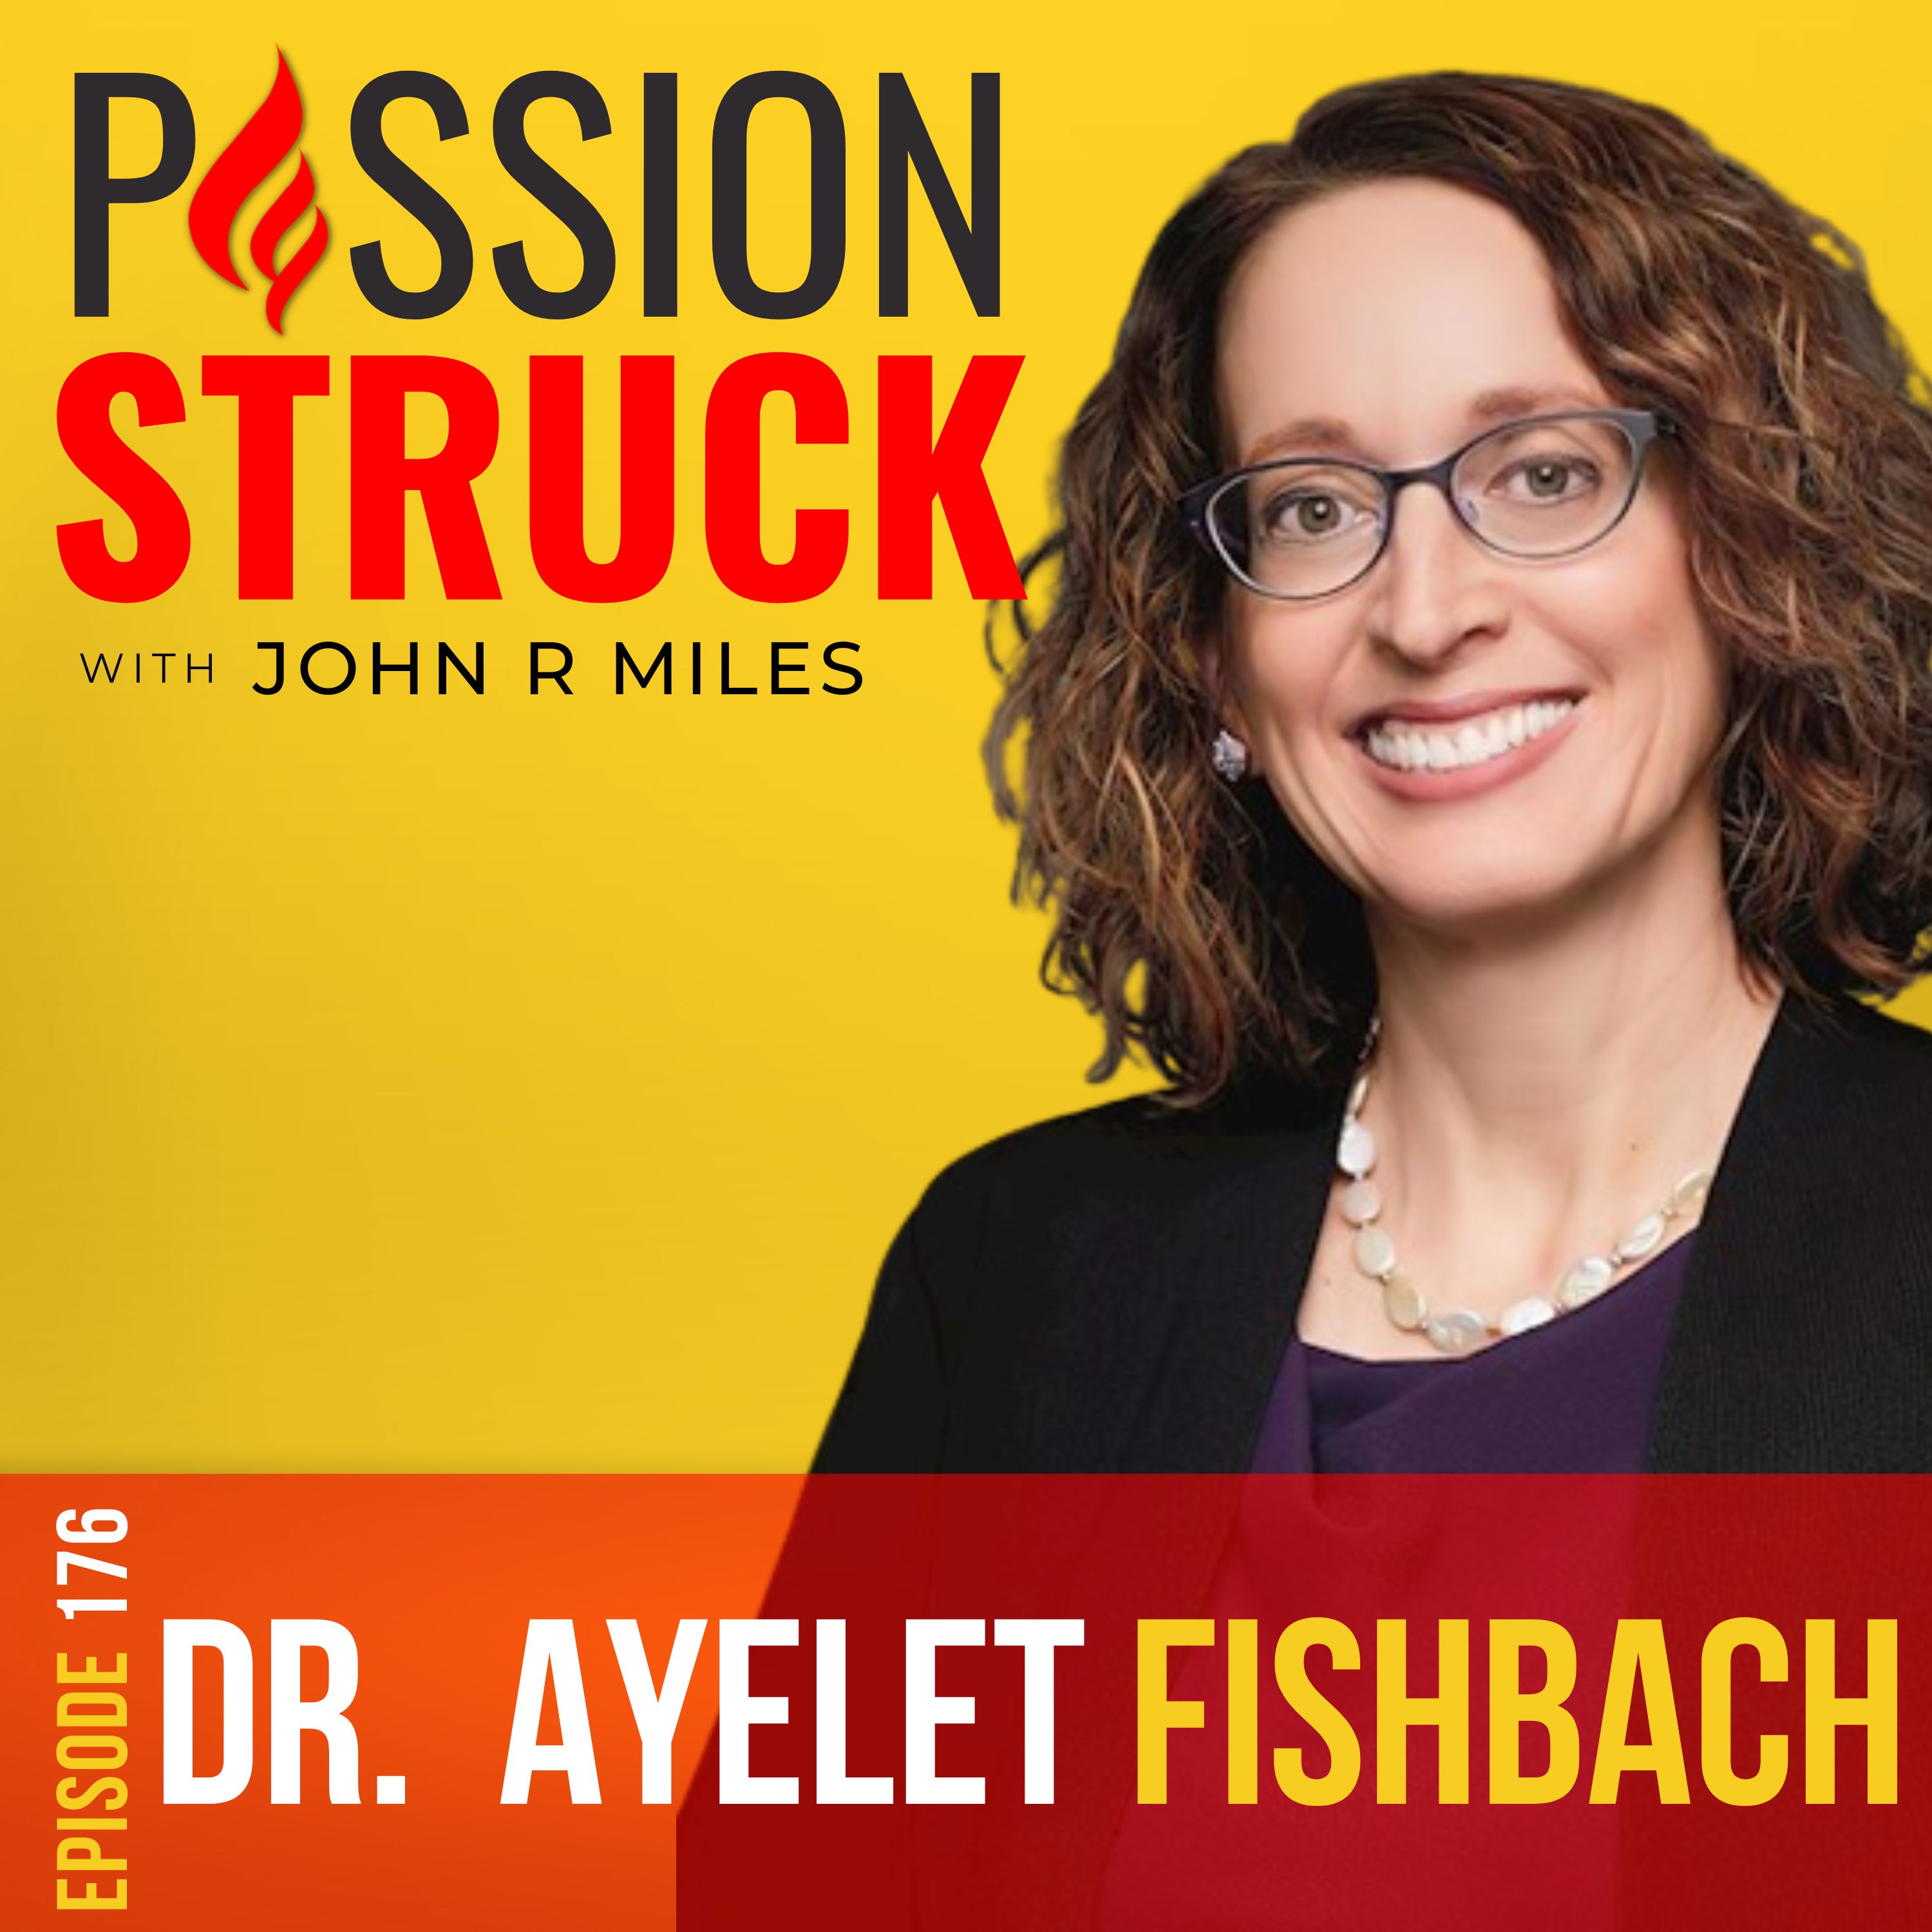 Passion Struck with John R. Miles album cover episode 176 with Dr. Ayelet Fishbach